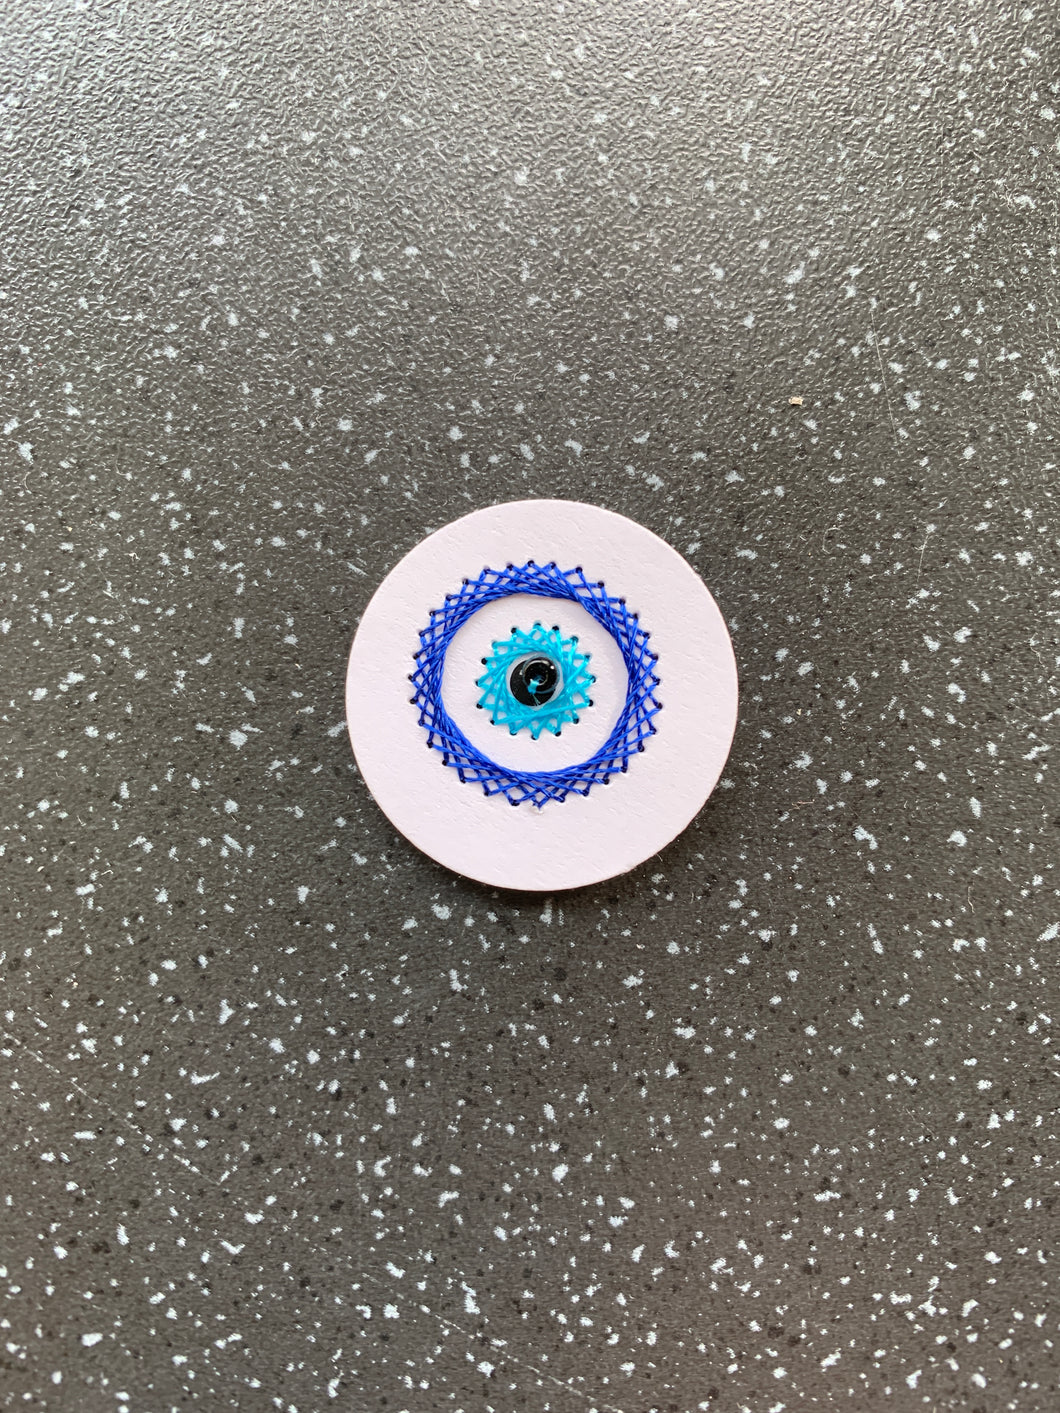 Evil Eye Protection Intention Card for Removing Evil Eye and Bad Energies